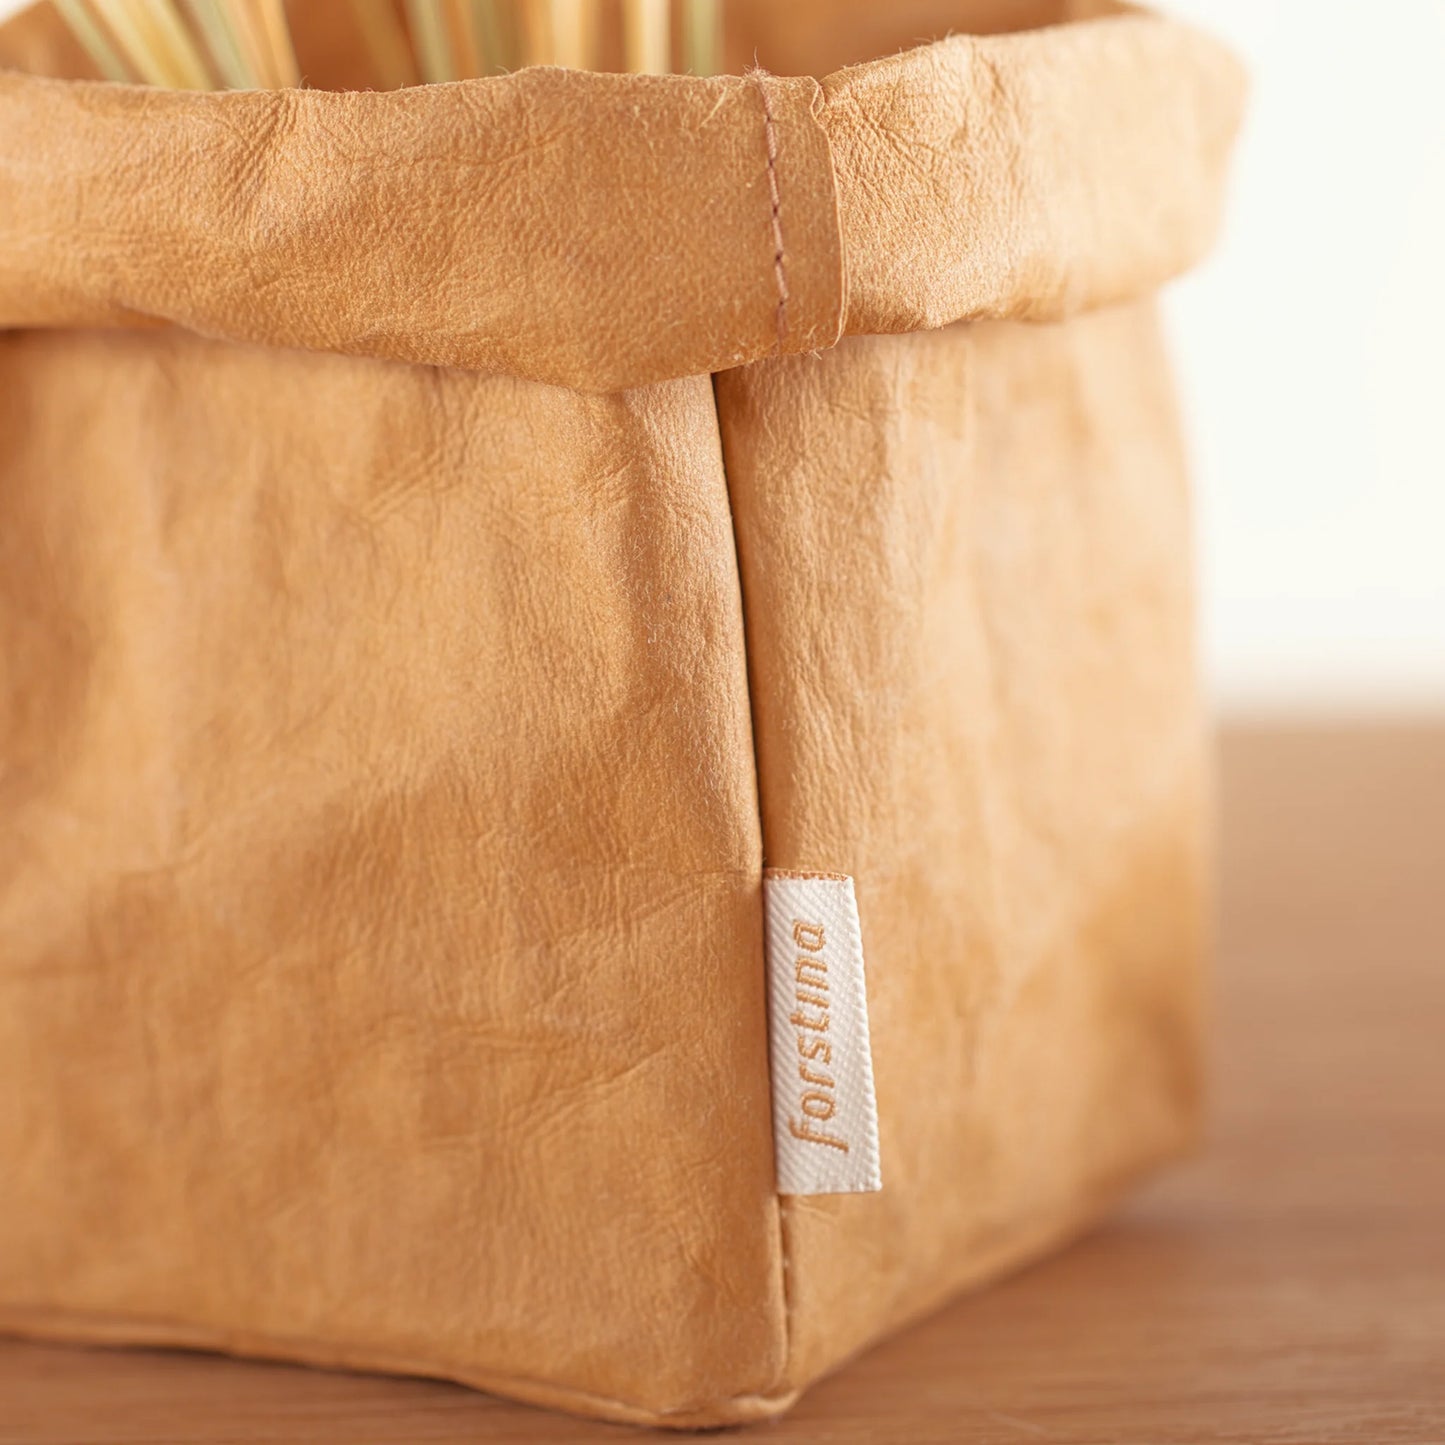 Combining sustainability and beauty, our paper bags are versatile and functional storage solutions for your home that can be repurposed time and time again.